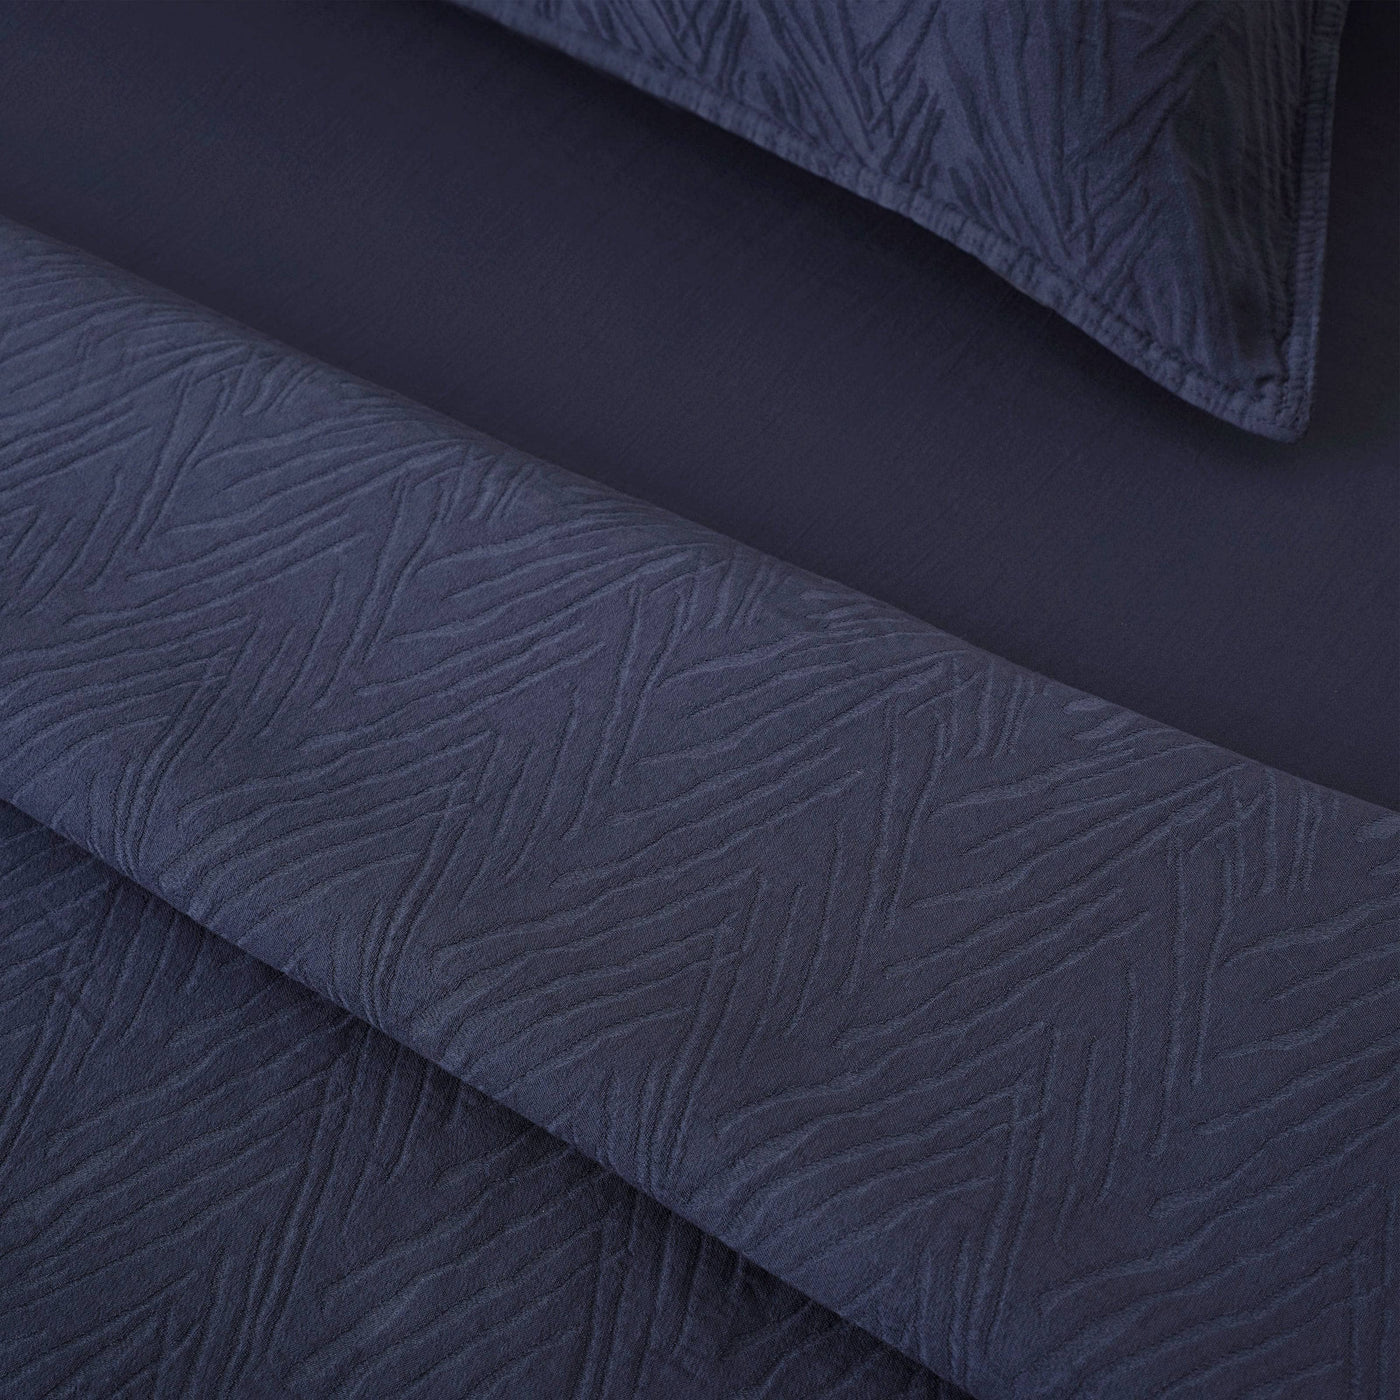 Freddie 100% Turkish Cotton 300 TC Fitted Sheet, Navy, King Size Bed Sheets sazy.com